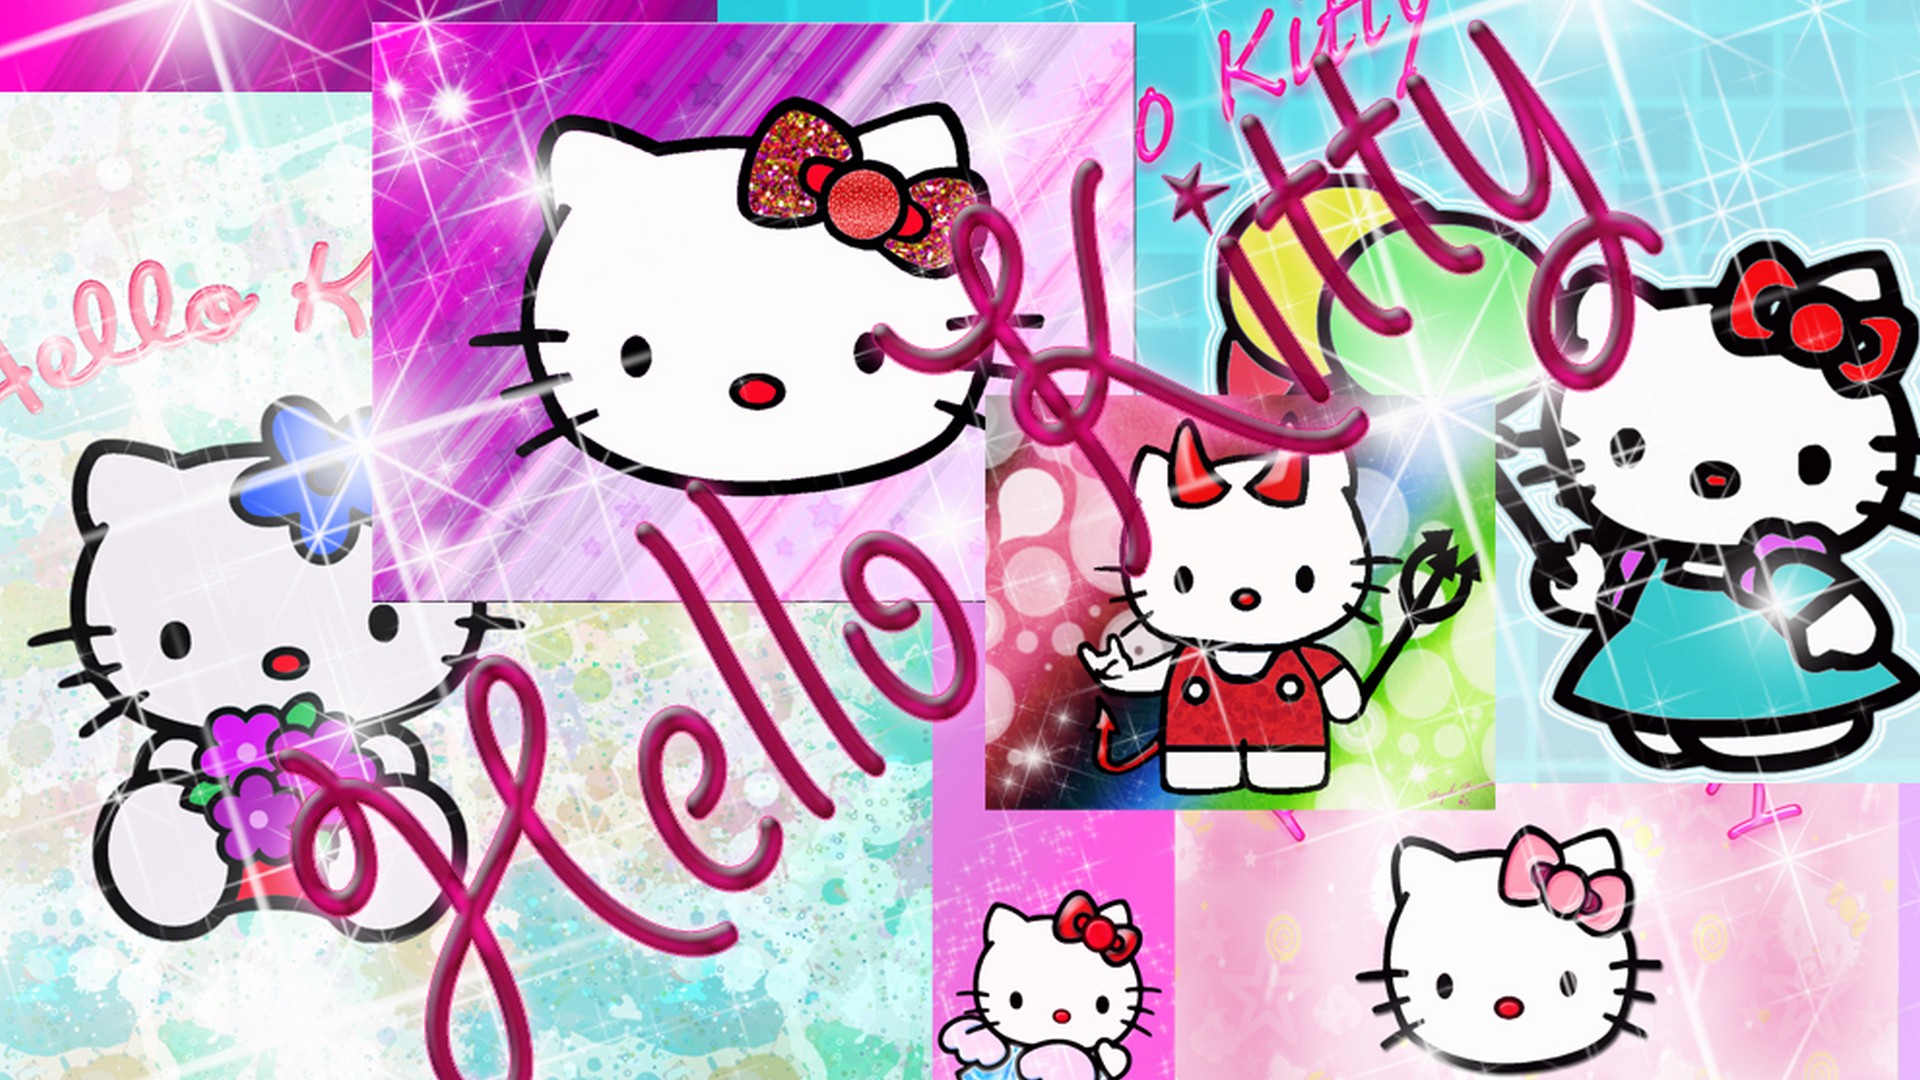 Sanrio Hello Kitty Desktop Backgrounds with image resolution 1920x1080 pixel. You can make this wallpaper for your Desktop Computer Backgrounds, Mac Wallpapers, Android Lock screen or iPhone Screensavers